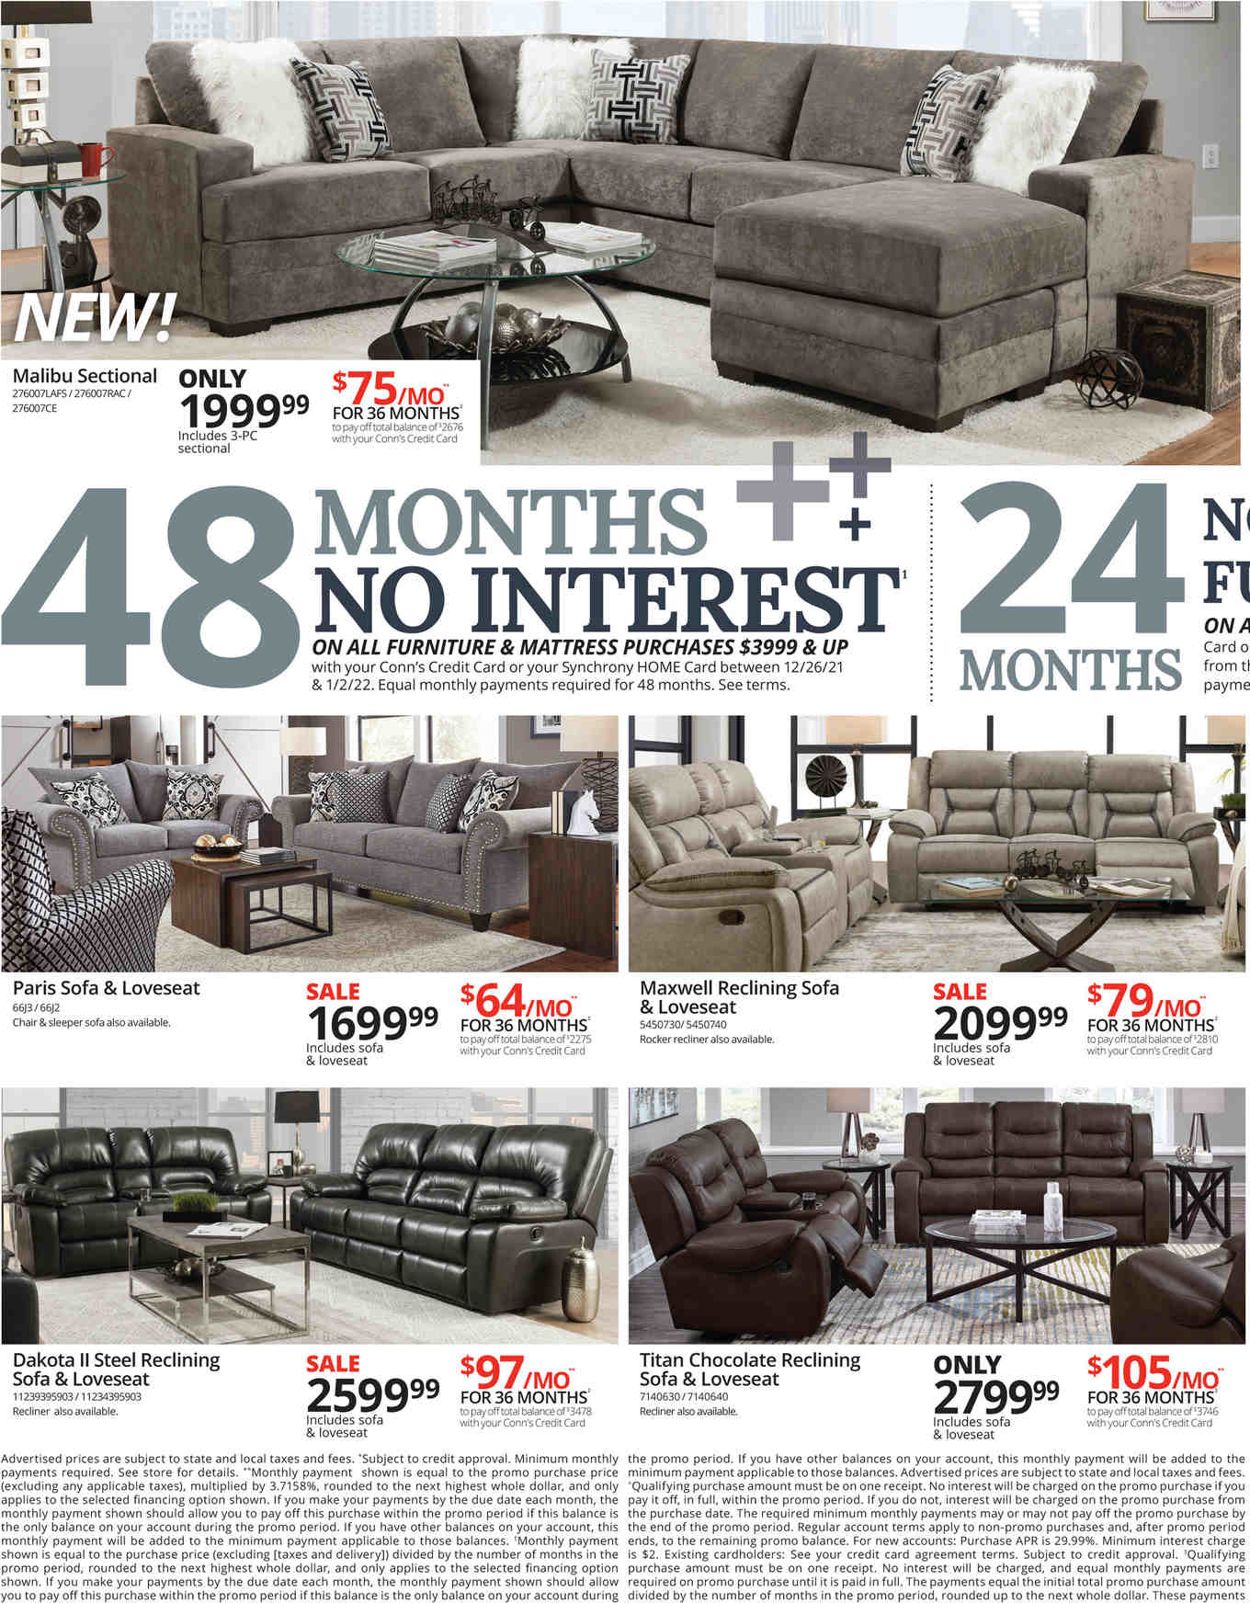 Conn's Home Plus Ad from 12/26/2021